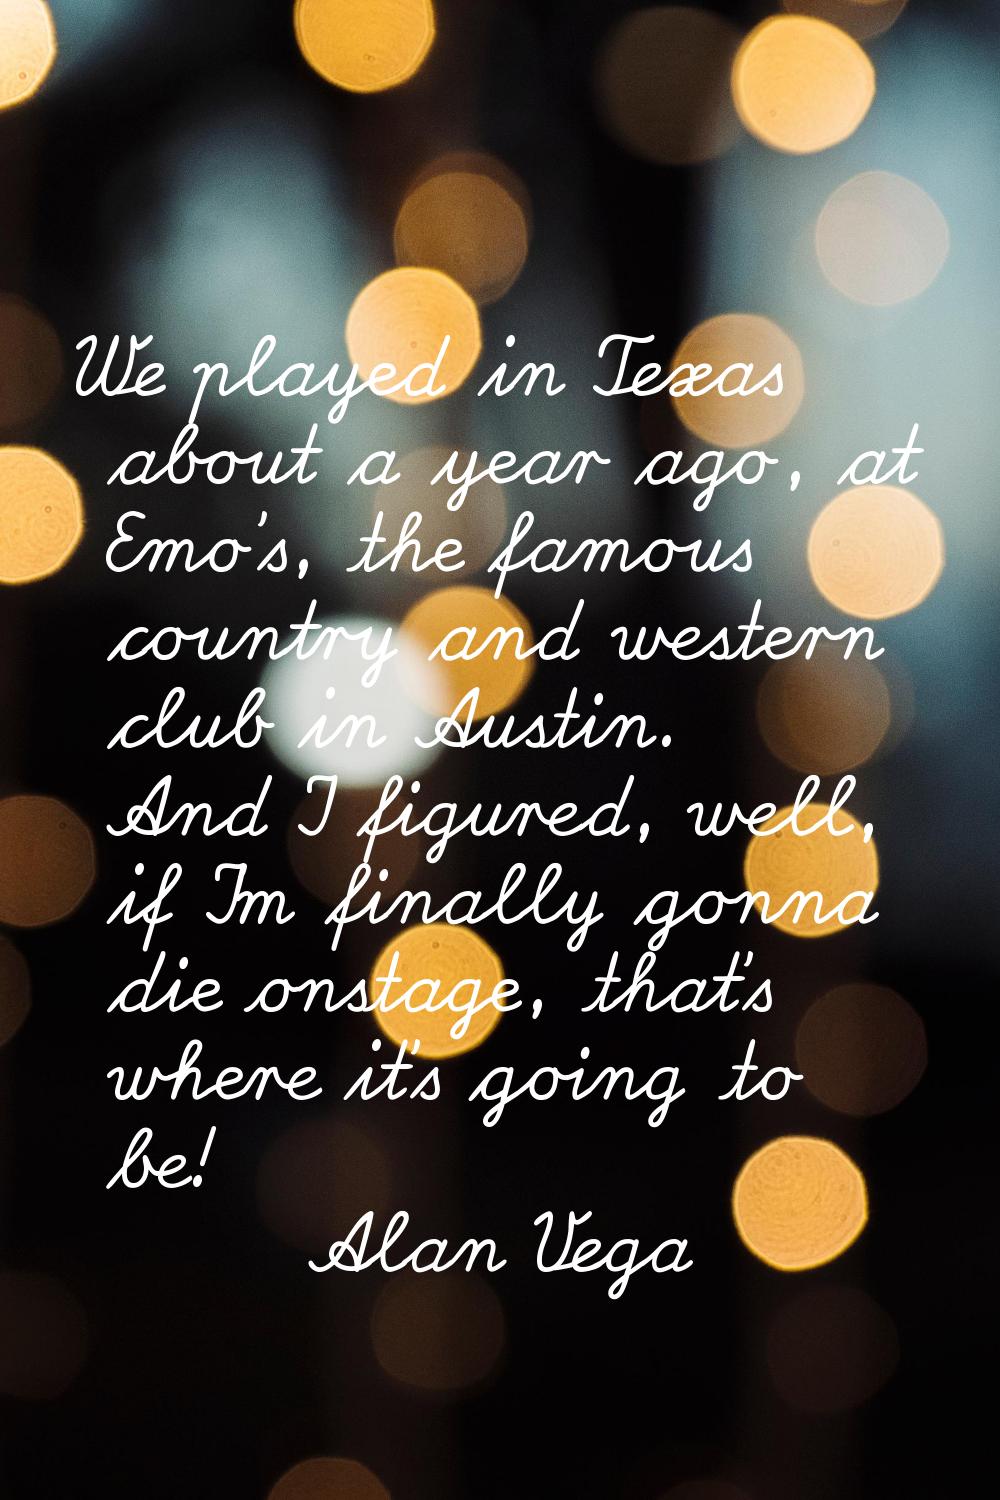 We played in Texas about a year ago, at Emo's, the famous country and western club in Austin. And I